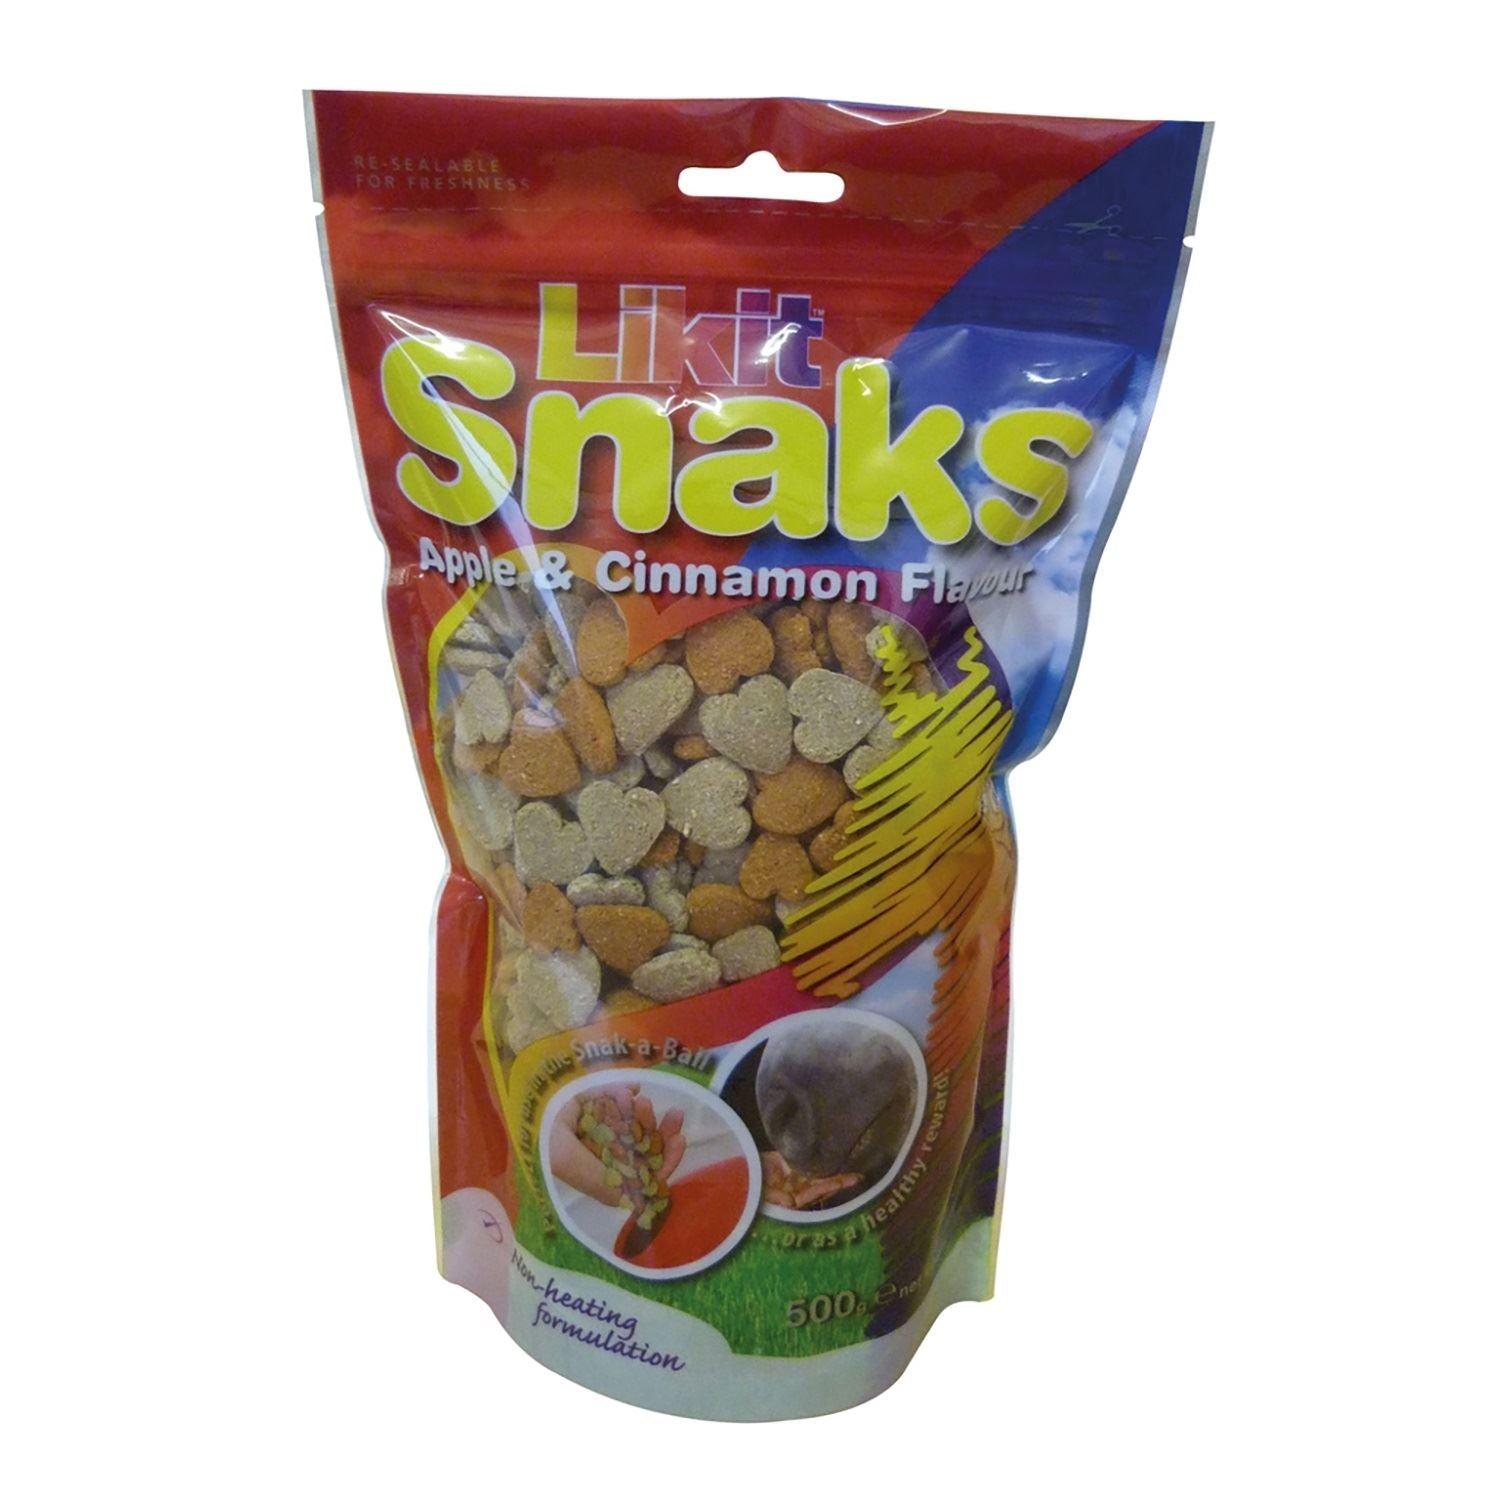 Likit Snaks - Just Horse Riders